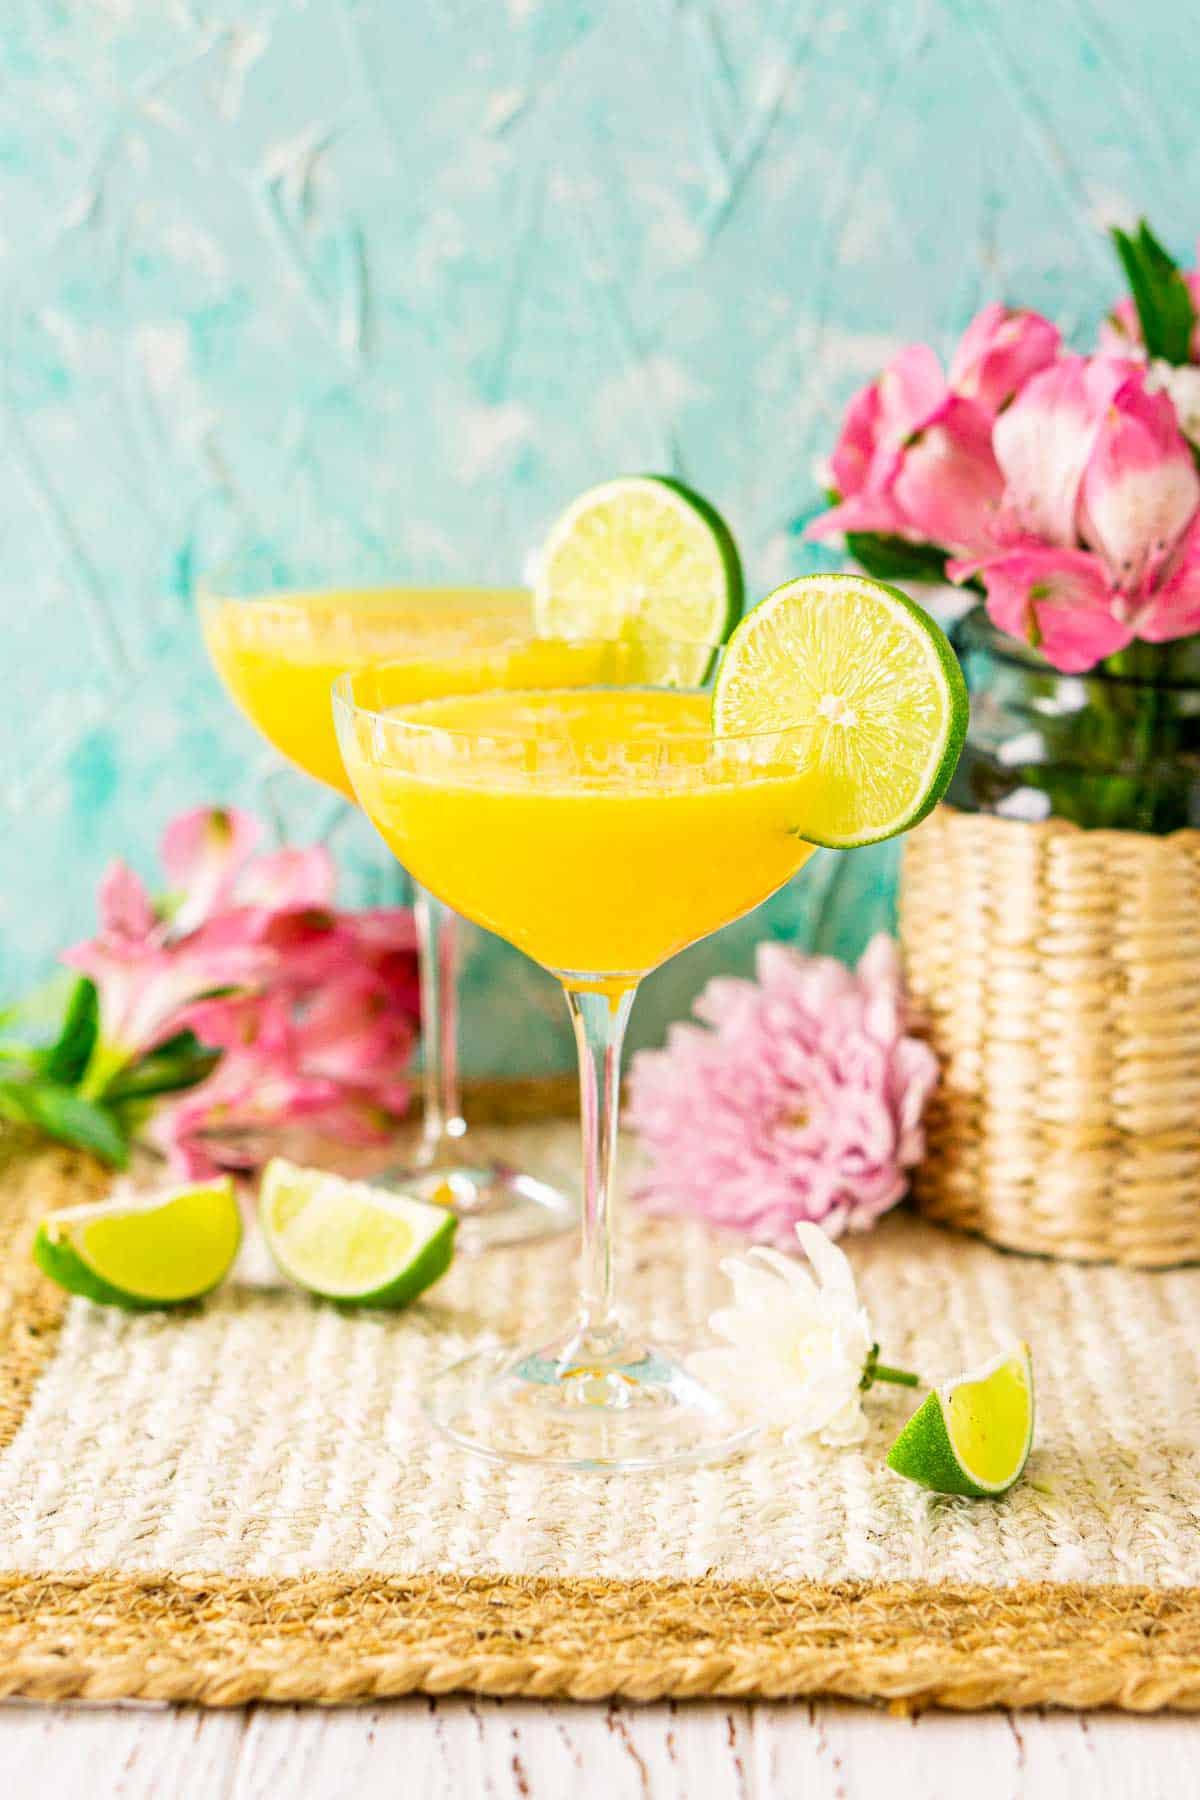 A passion fruit daiquiri on a straw placemat against a blue background with limes and colorful flowers around it.